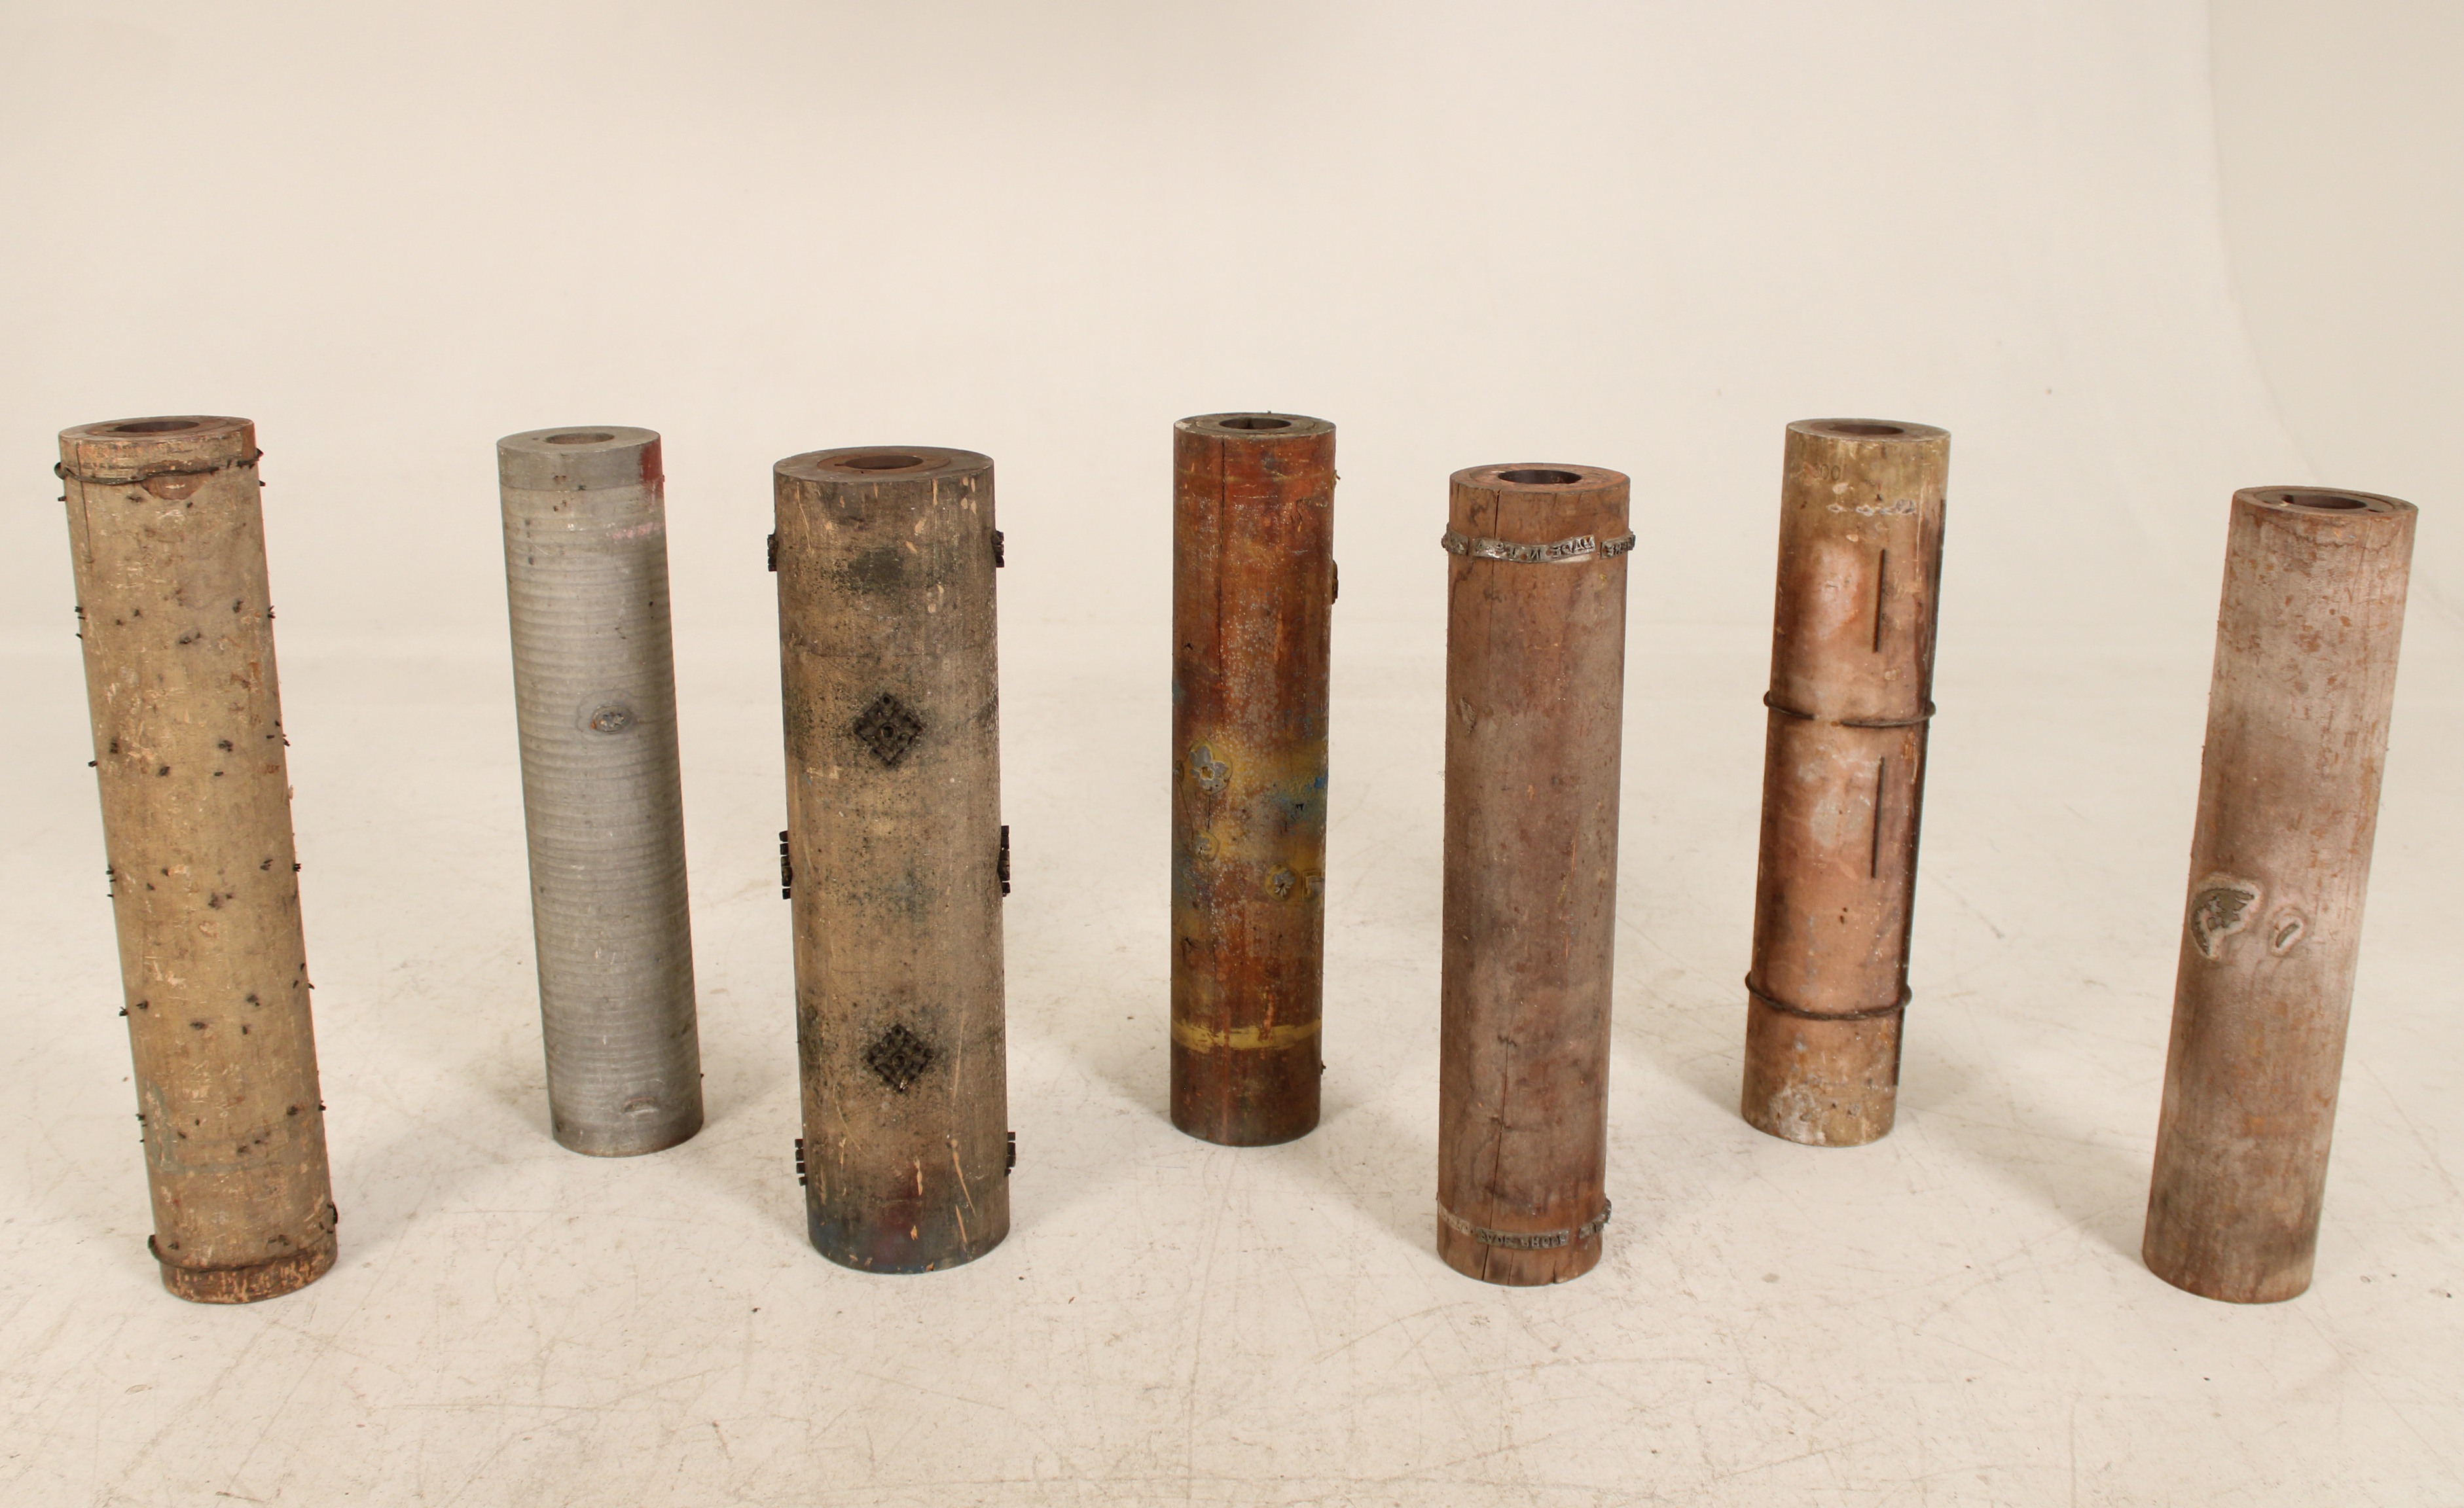 GROUP OF 7 WOODEN WALLPAPER ROLLERS